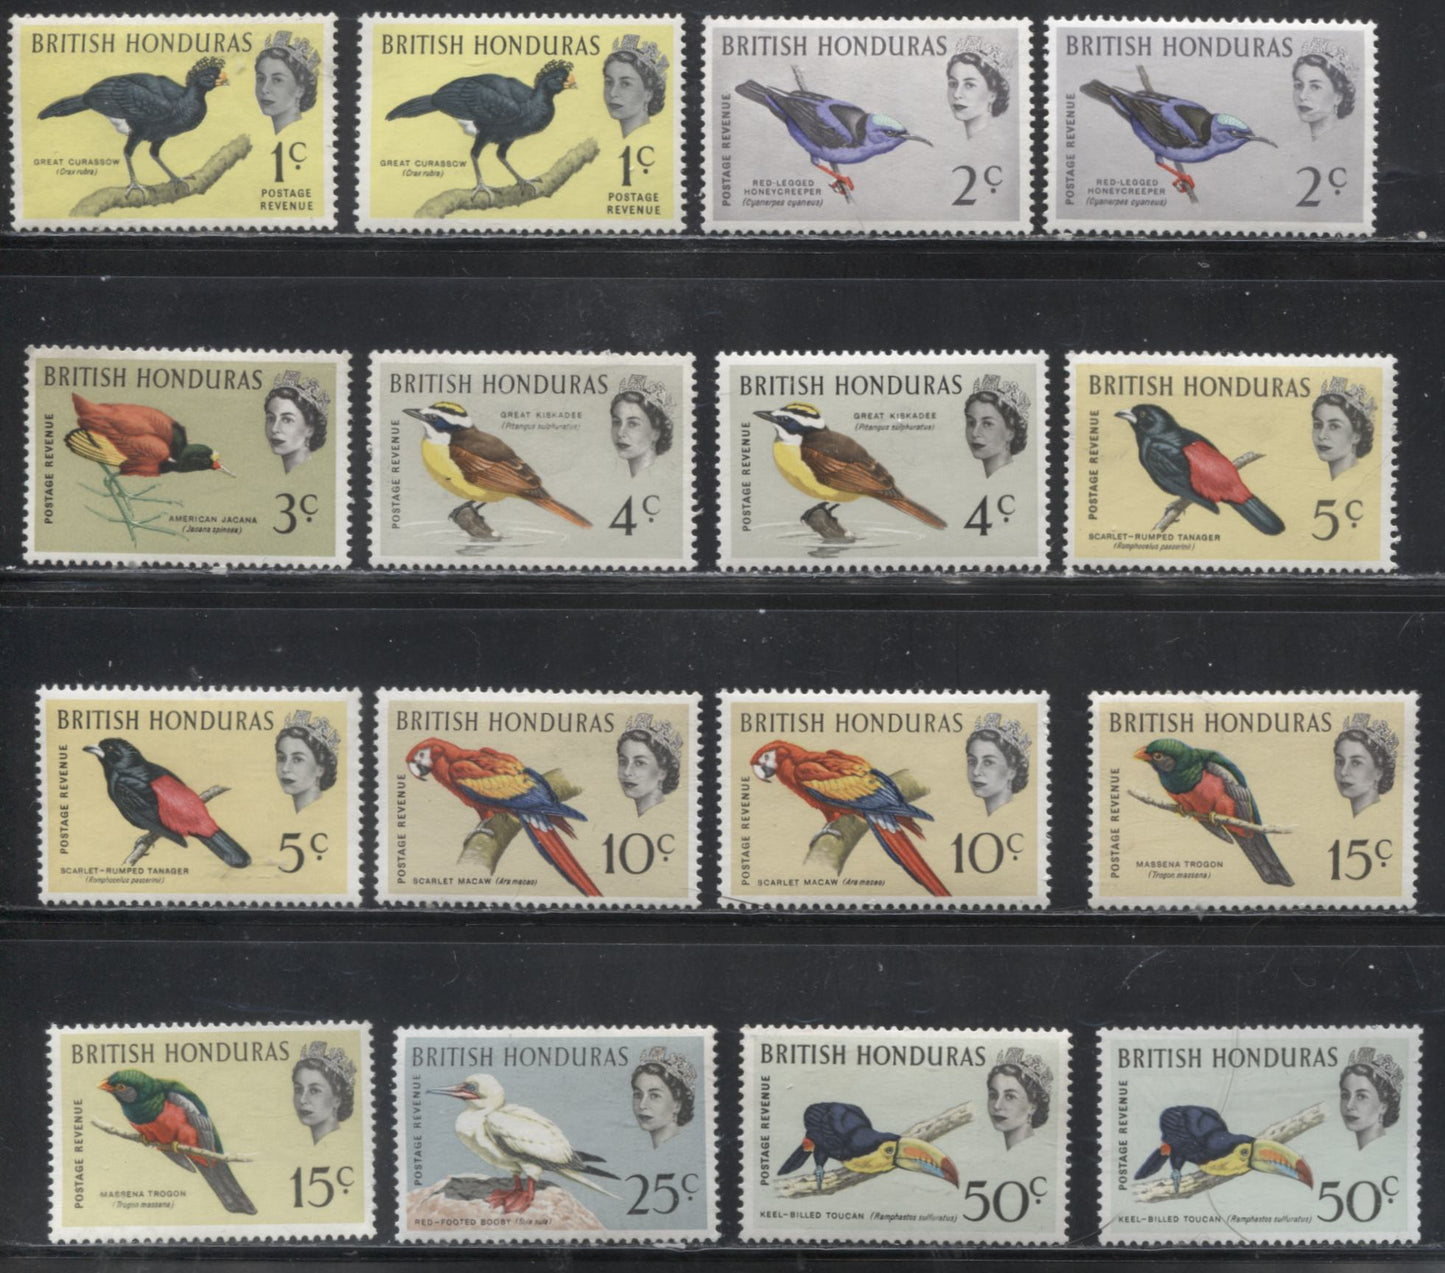 British Honduras SG#202-213 1962 Bird Definitive Issue, A VFNH Complete Set Including Additional Paper Varieties of Most Values